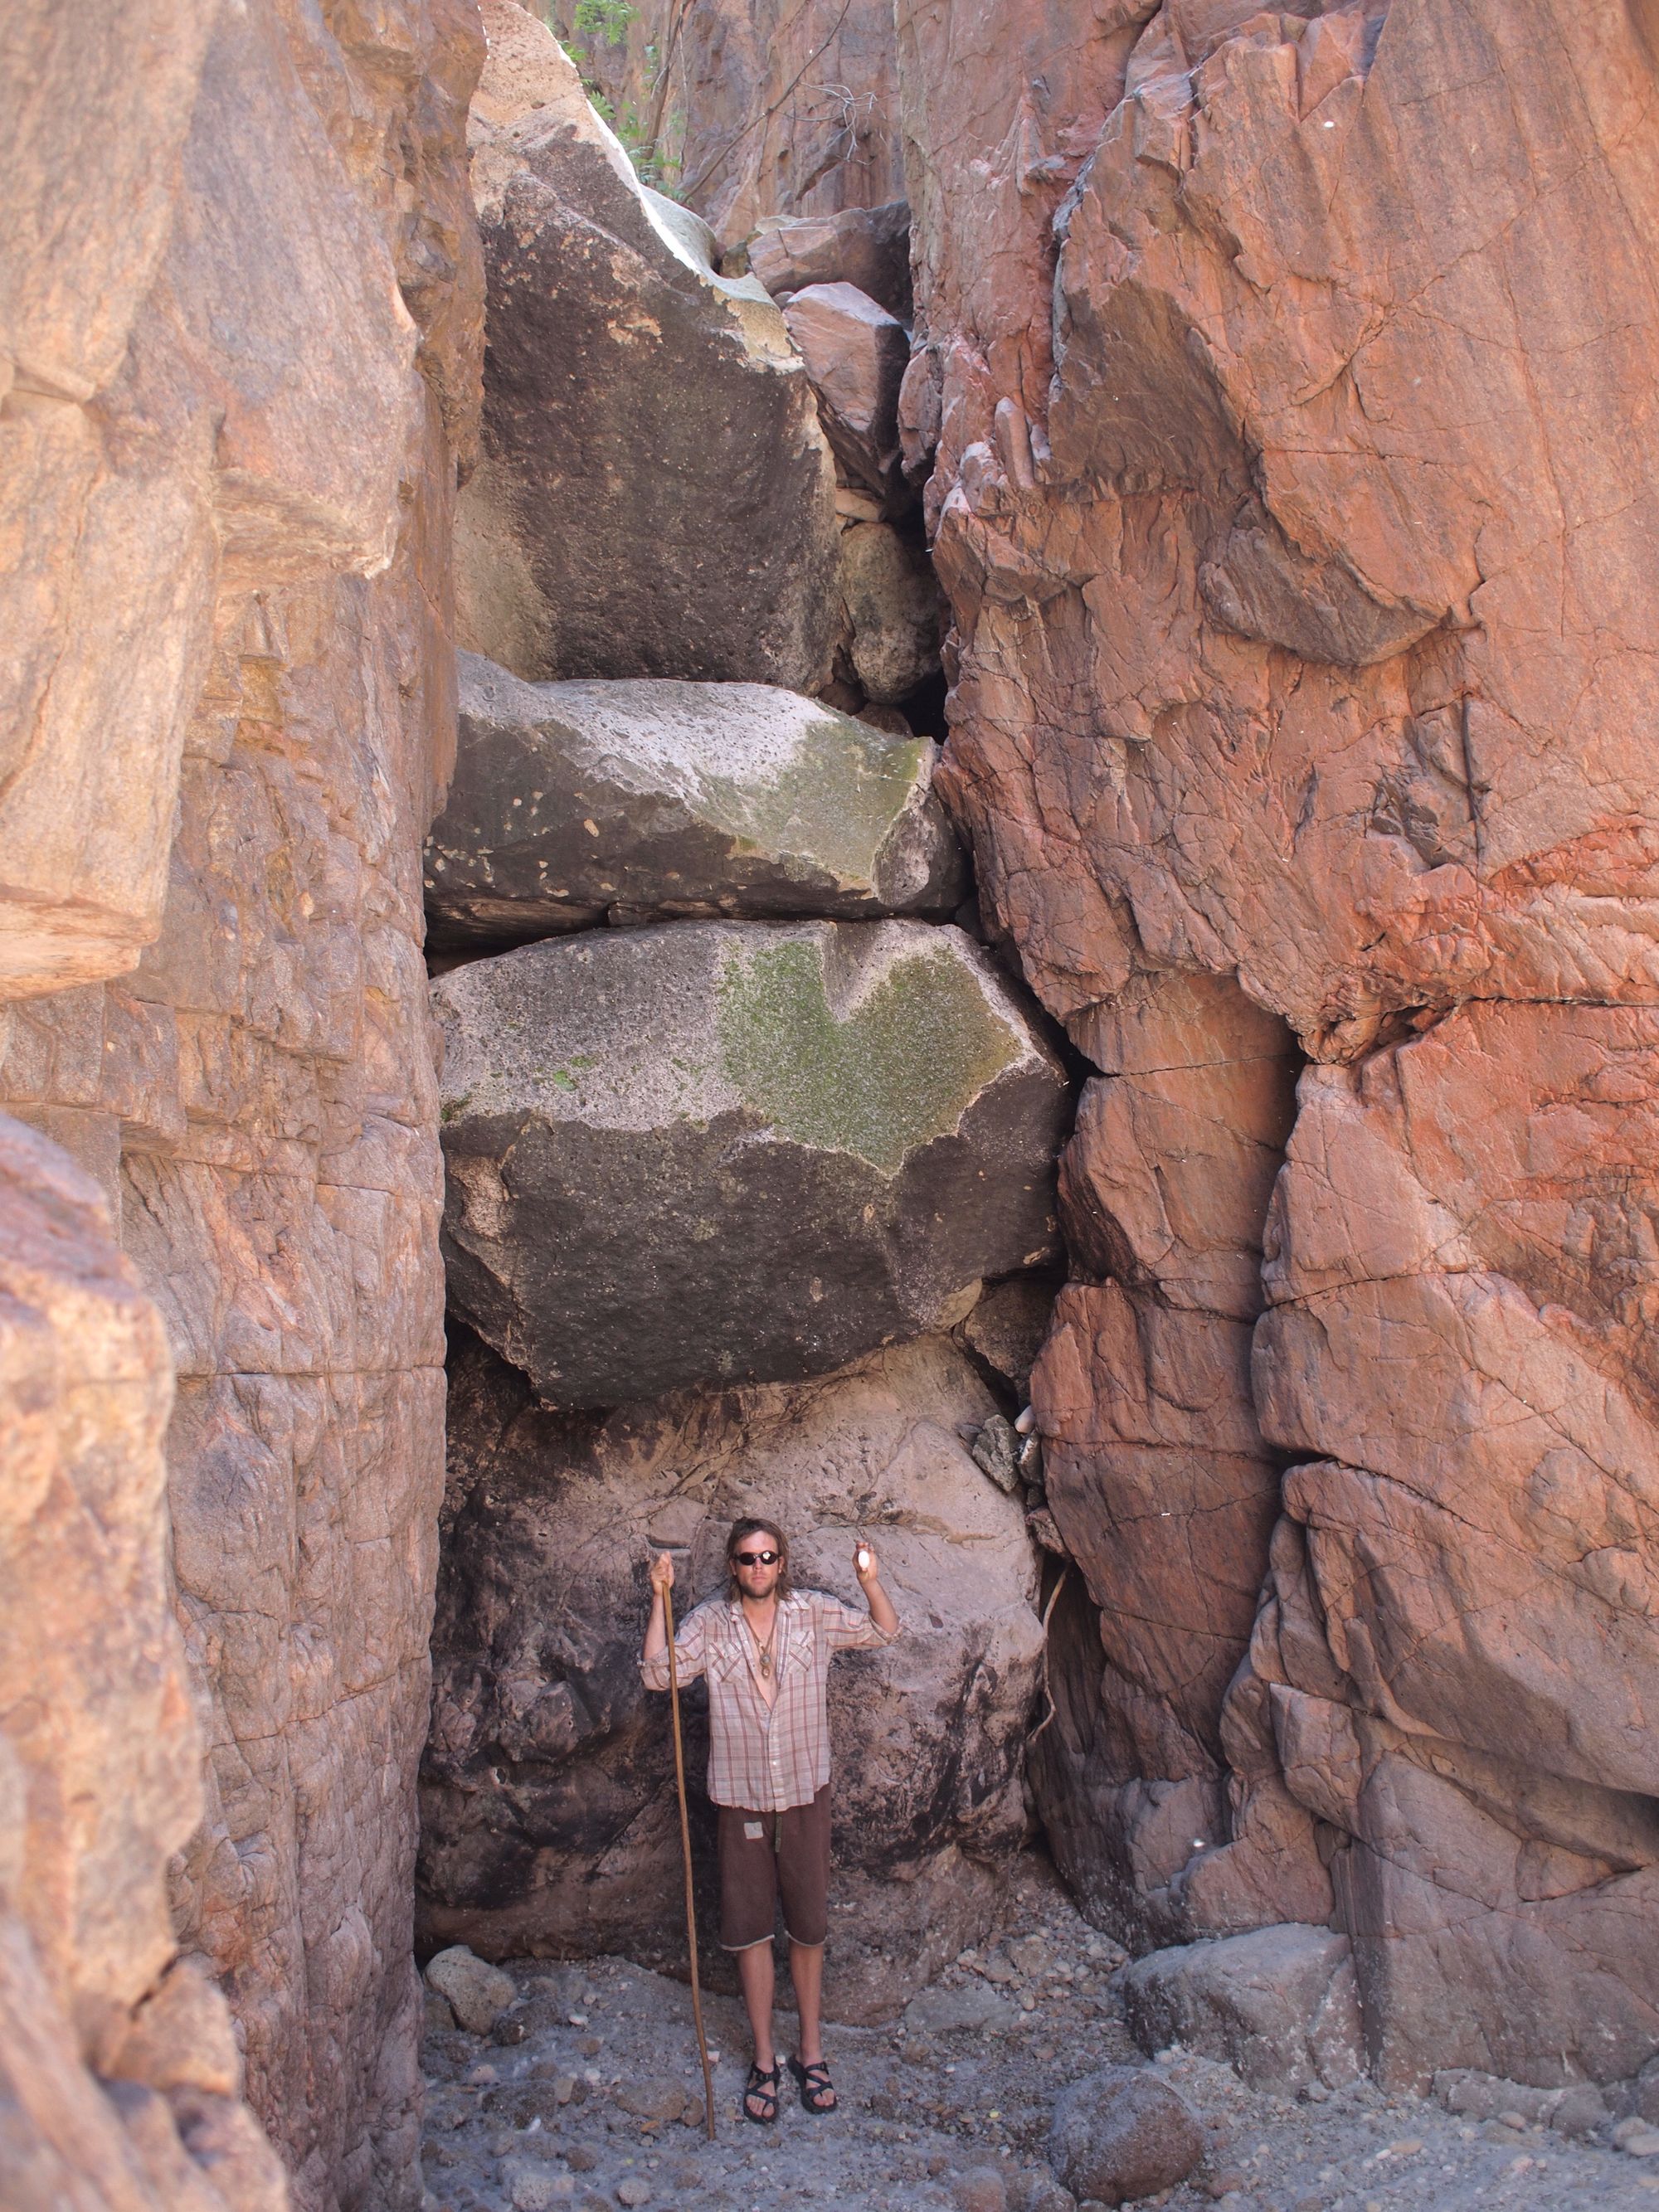 A man in plaid shirt and brown shorts stands in front of giant chockstone boulders blocking a canyon entrance 